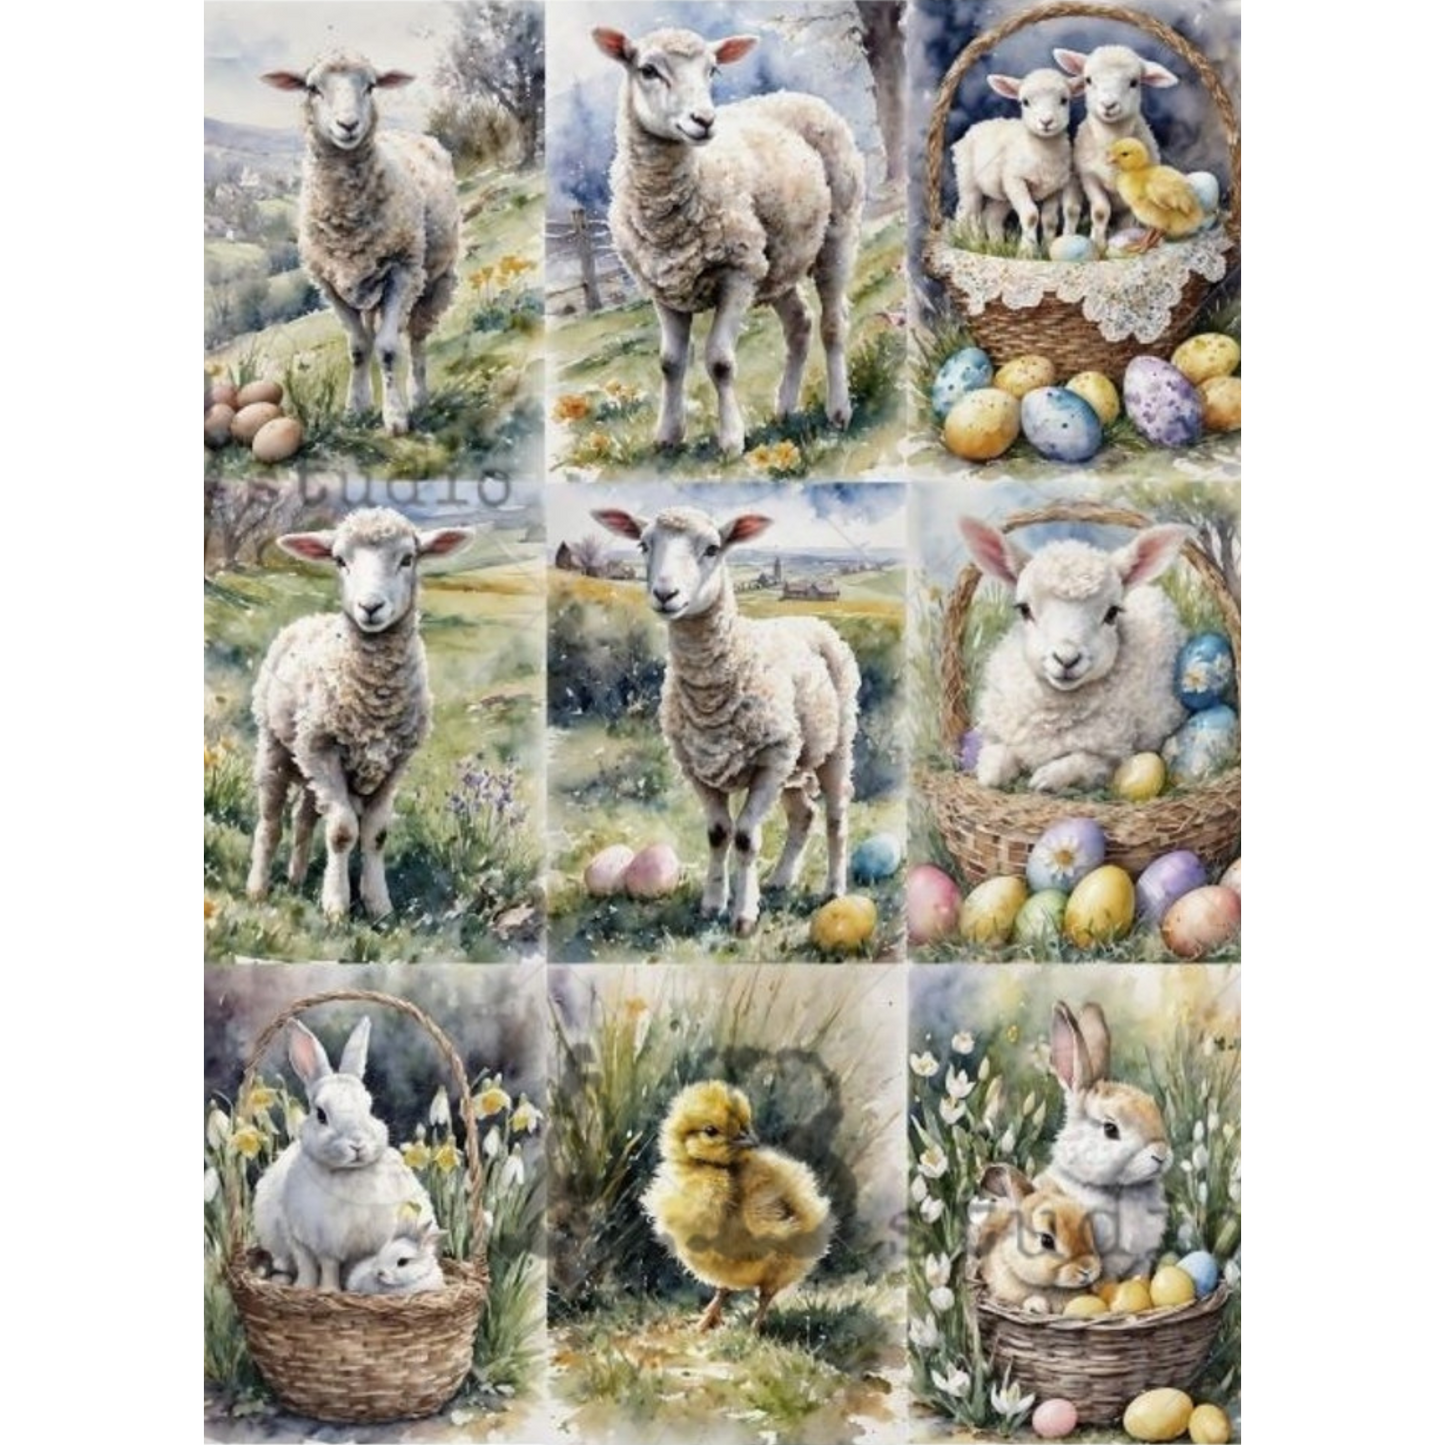 "9 Pack of Easter Lambs, Bunnies & Chicks" decoupage rice paper by AB Studio. Available at Milton's Daughter.